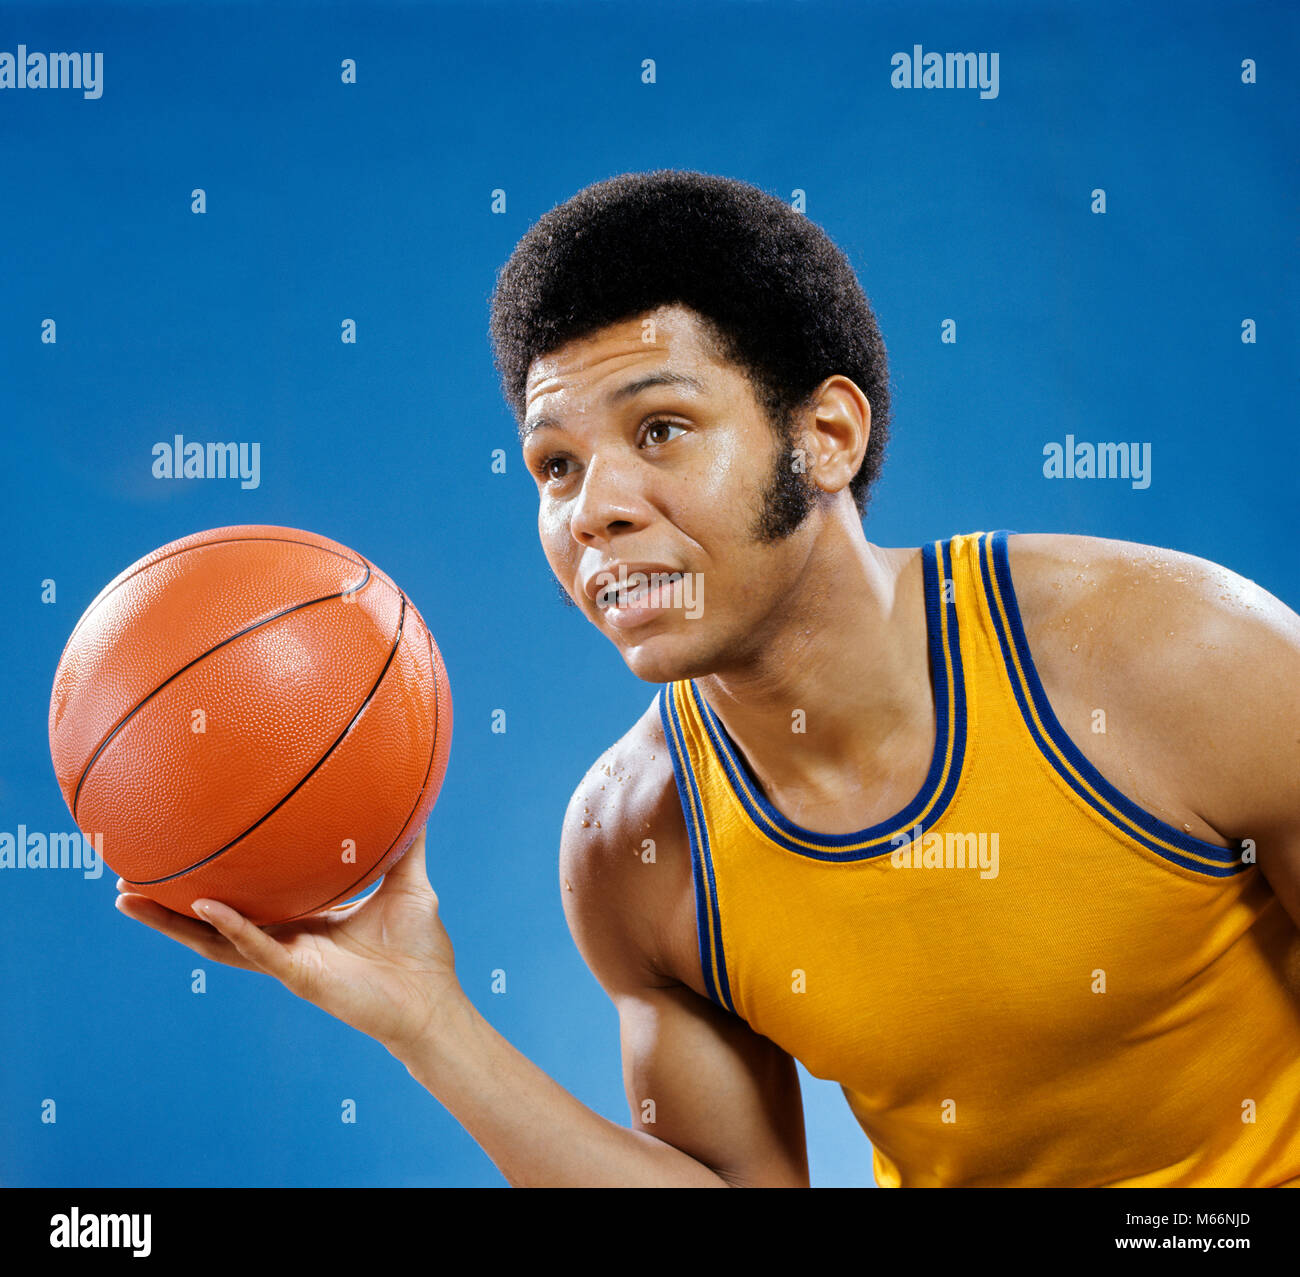 1960s 1970s AFRICAN AMERICAN MAN HOLDING BASKETBALL - ks8247 HAR001 HARS 20-25 YEARS GOALS SINGLE OBJECT HEAD AND SHOULDERS LEISURE AFRICAN-AMERICANS AFRICAN-AMERICAN EXCITEMENT RECREATION ETHNIC BLACK BLACK ETHNICITY 18-19 YEARS AFRICAN AMERICANS AFRICAN AMERICAN FACIAL HAIR HIGH SCHOOL BALL SPORT HAIRDO MALES SIDEBURNS YOUNG ADULT MAN OCCUPATIONS OLD FASHIONED PERSONS Stock Photo